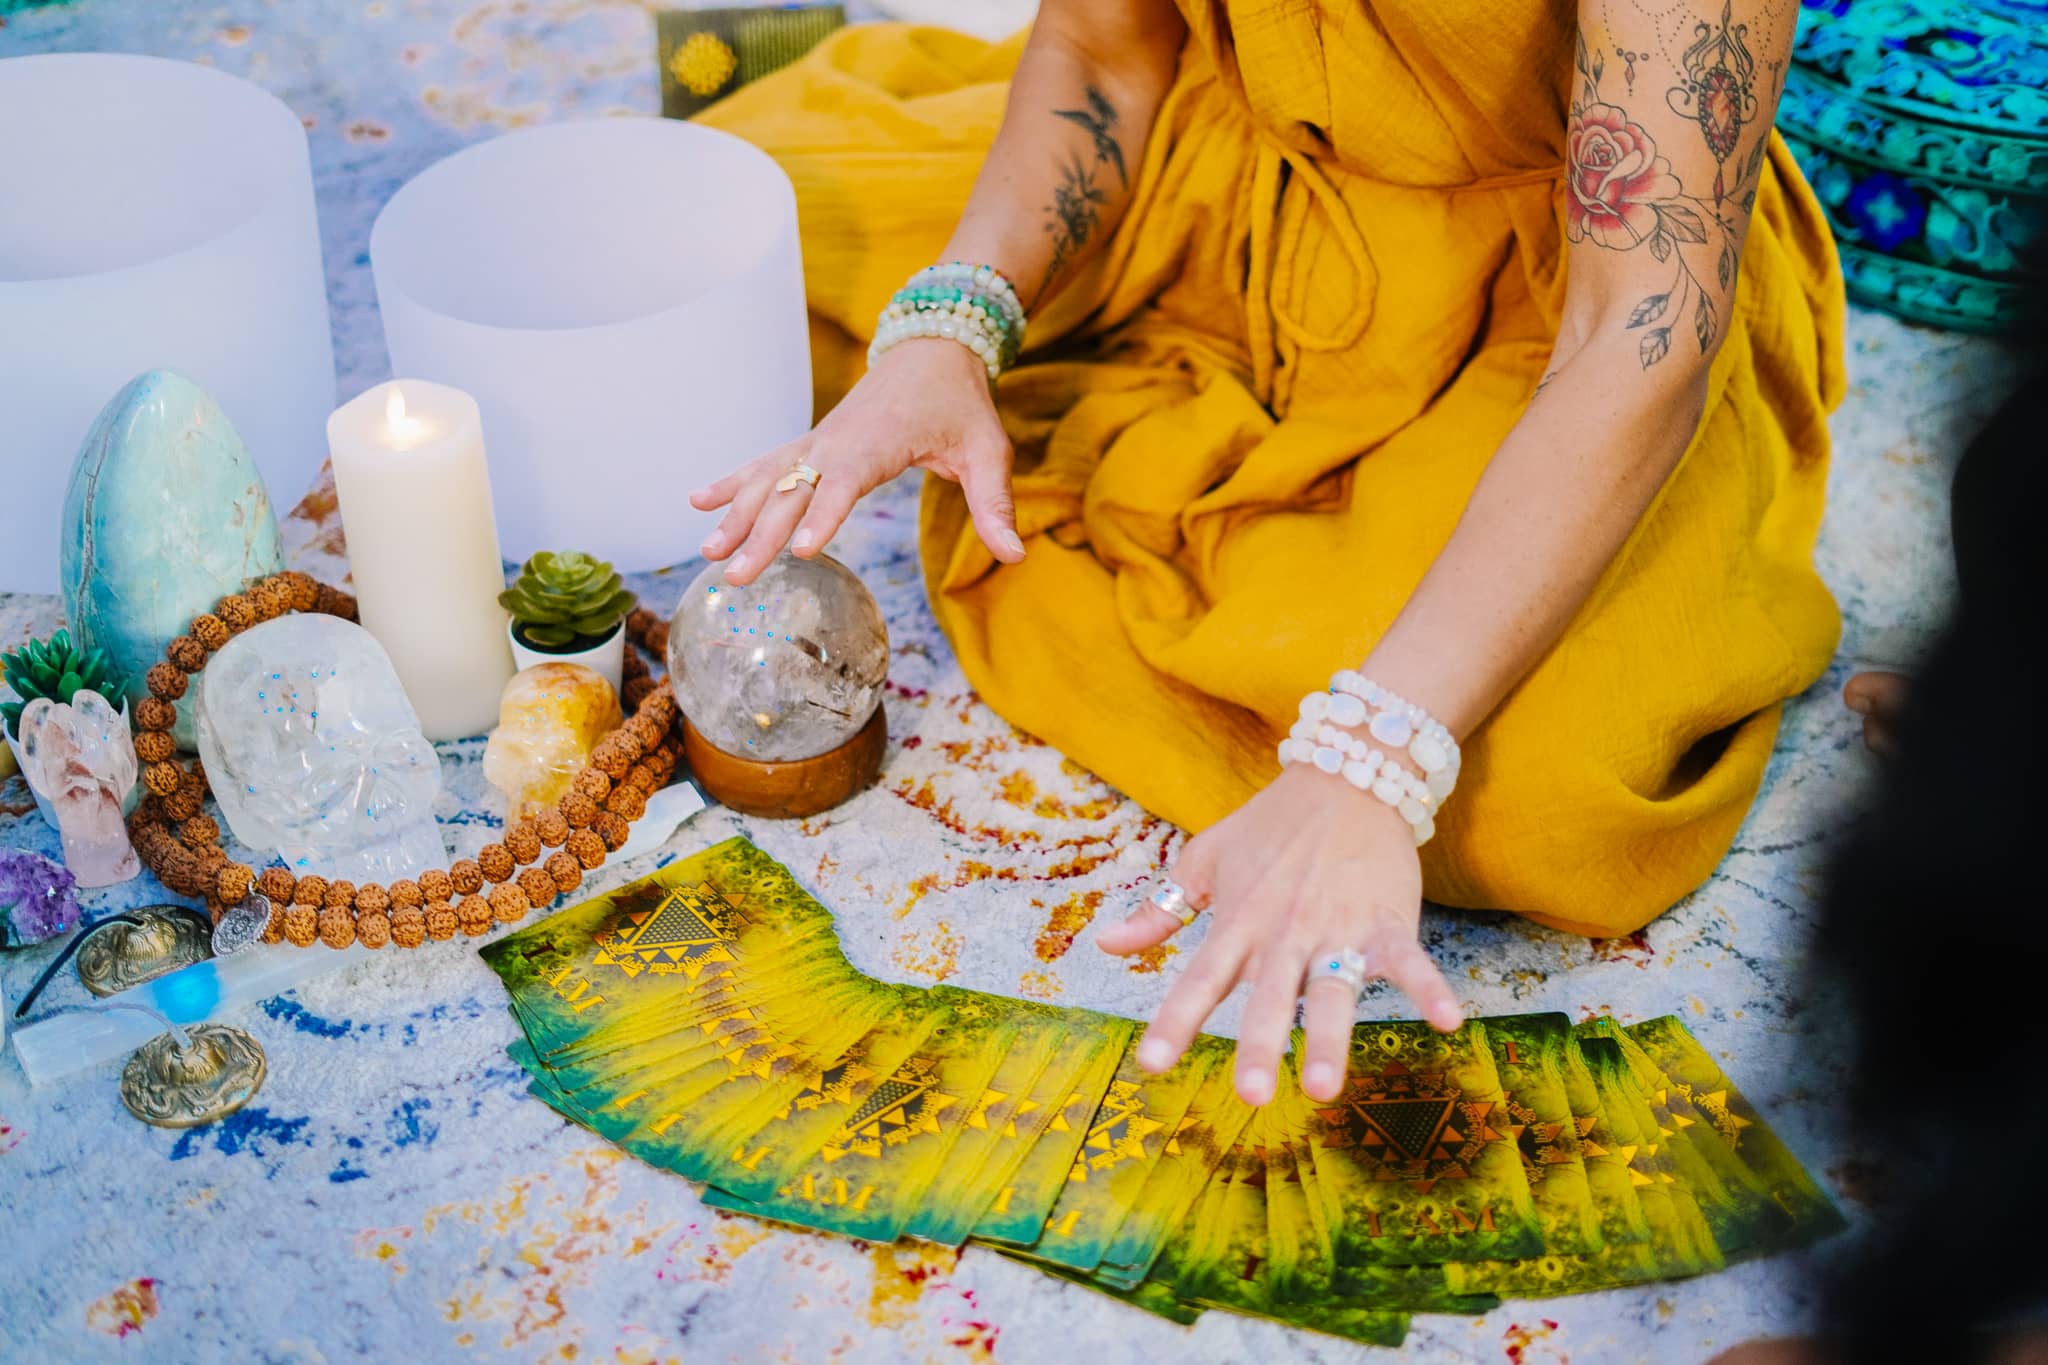 How to Integrate Energy Work and Sacred Ceremonies into Daily Life